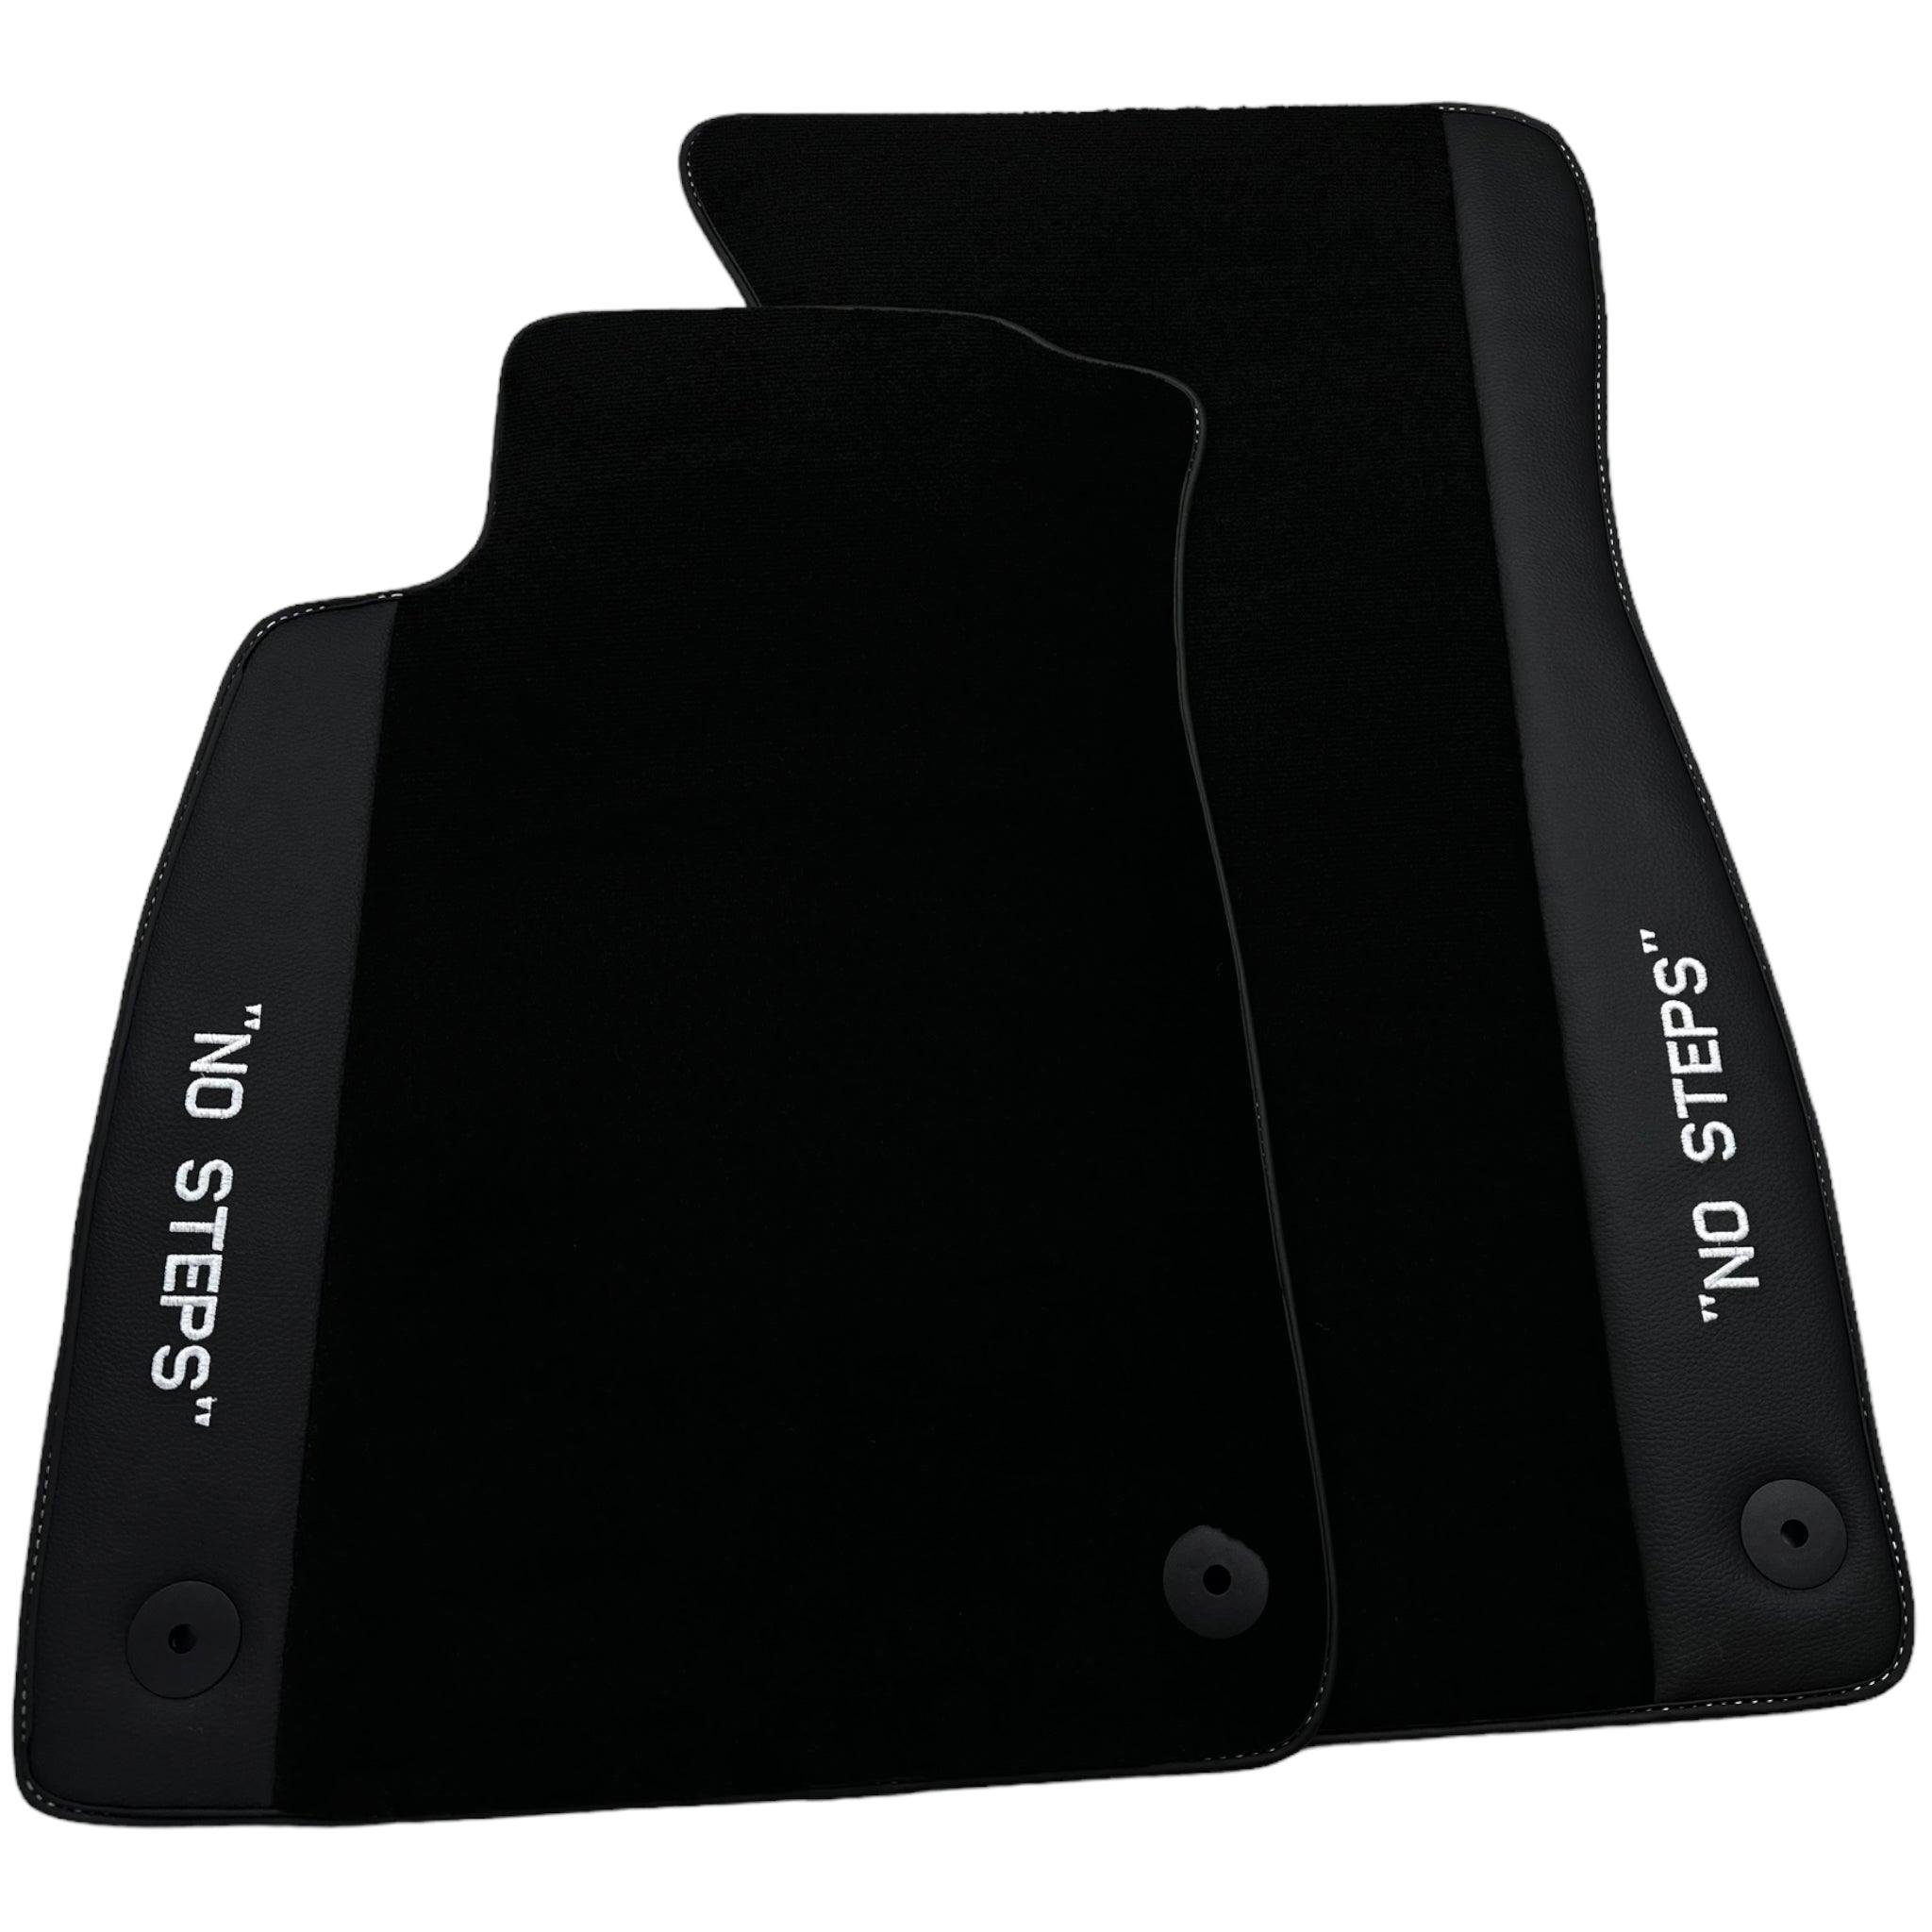 Black Floor Mats for Audi A5 - F53 Coupe (2020-2023) | No Steps Edition